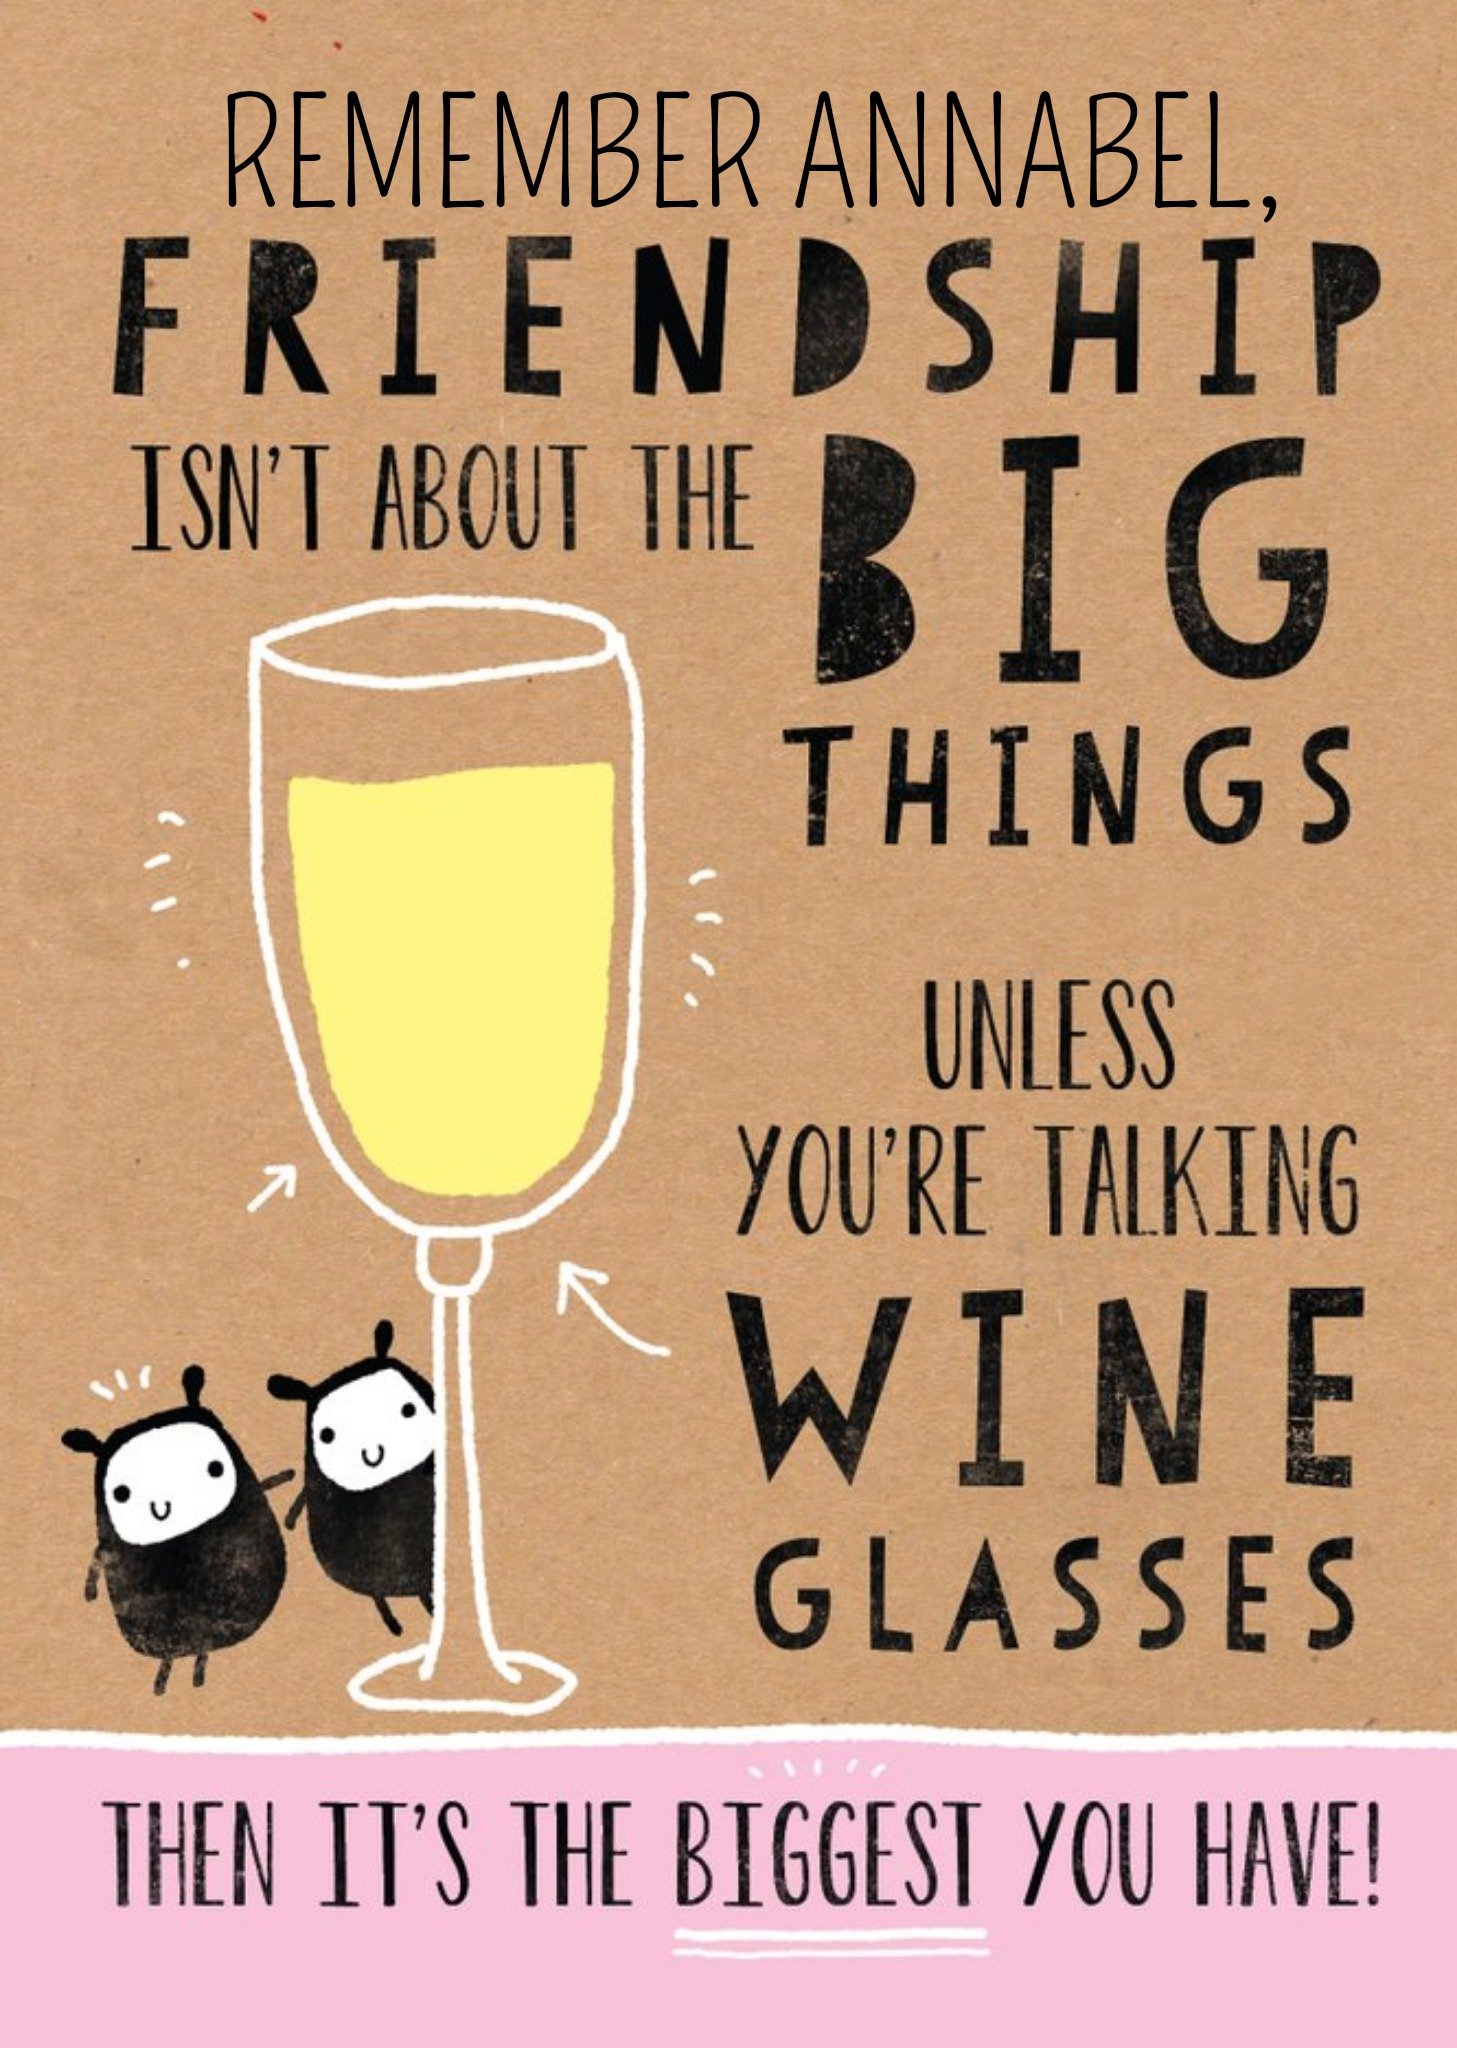 Moonpig Friendship Isn't About The Big Things Funny Personalised Birthday Card, Large